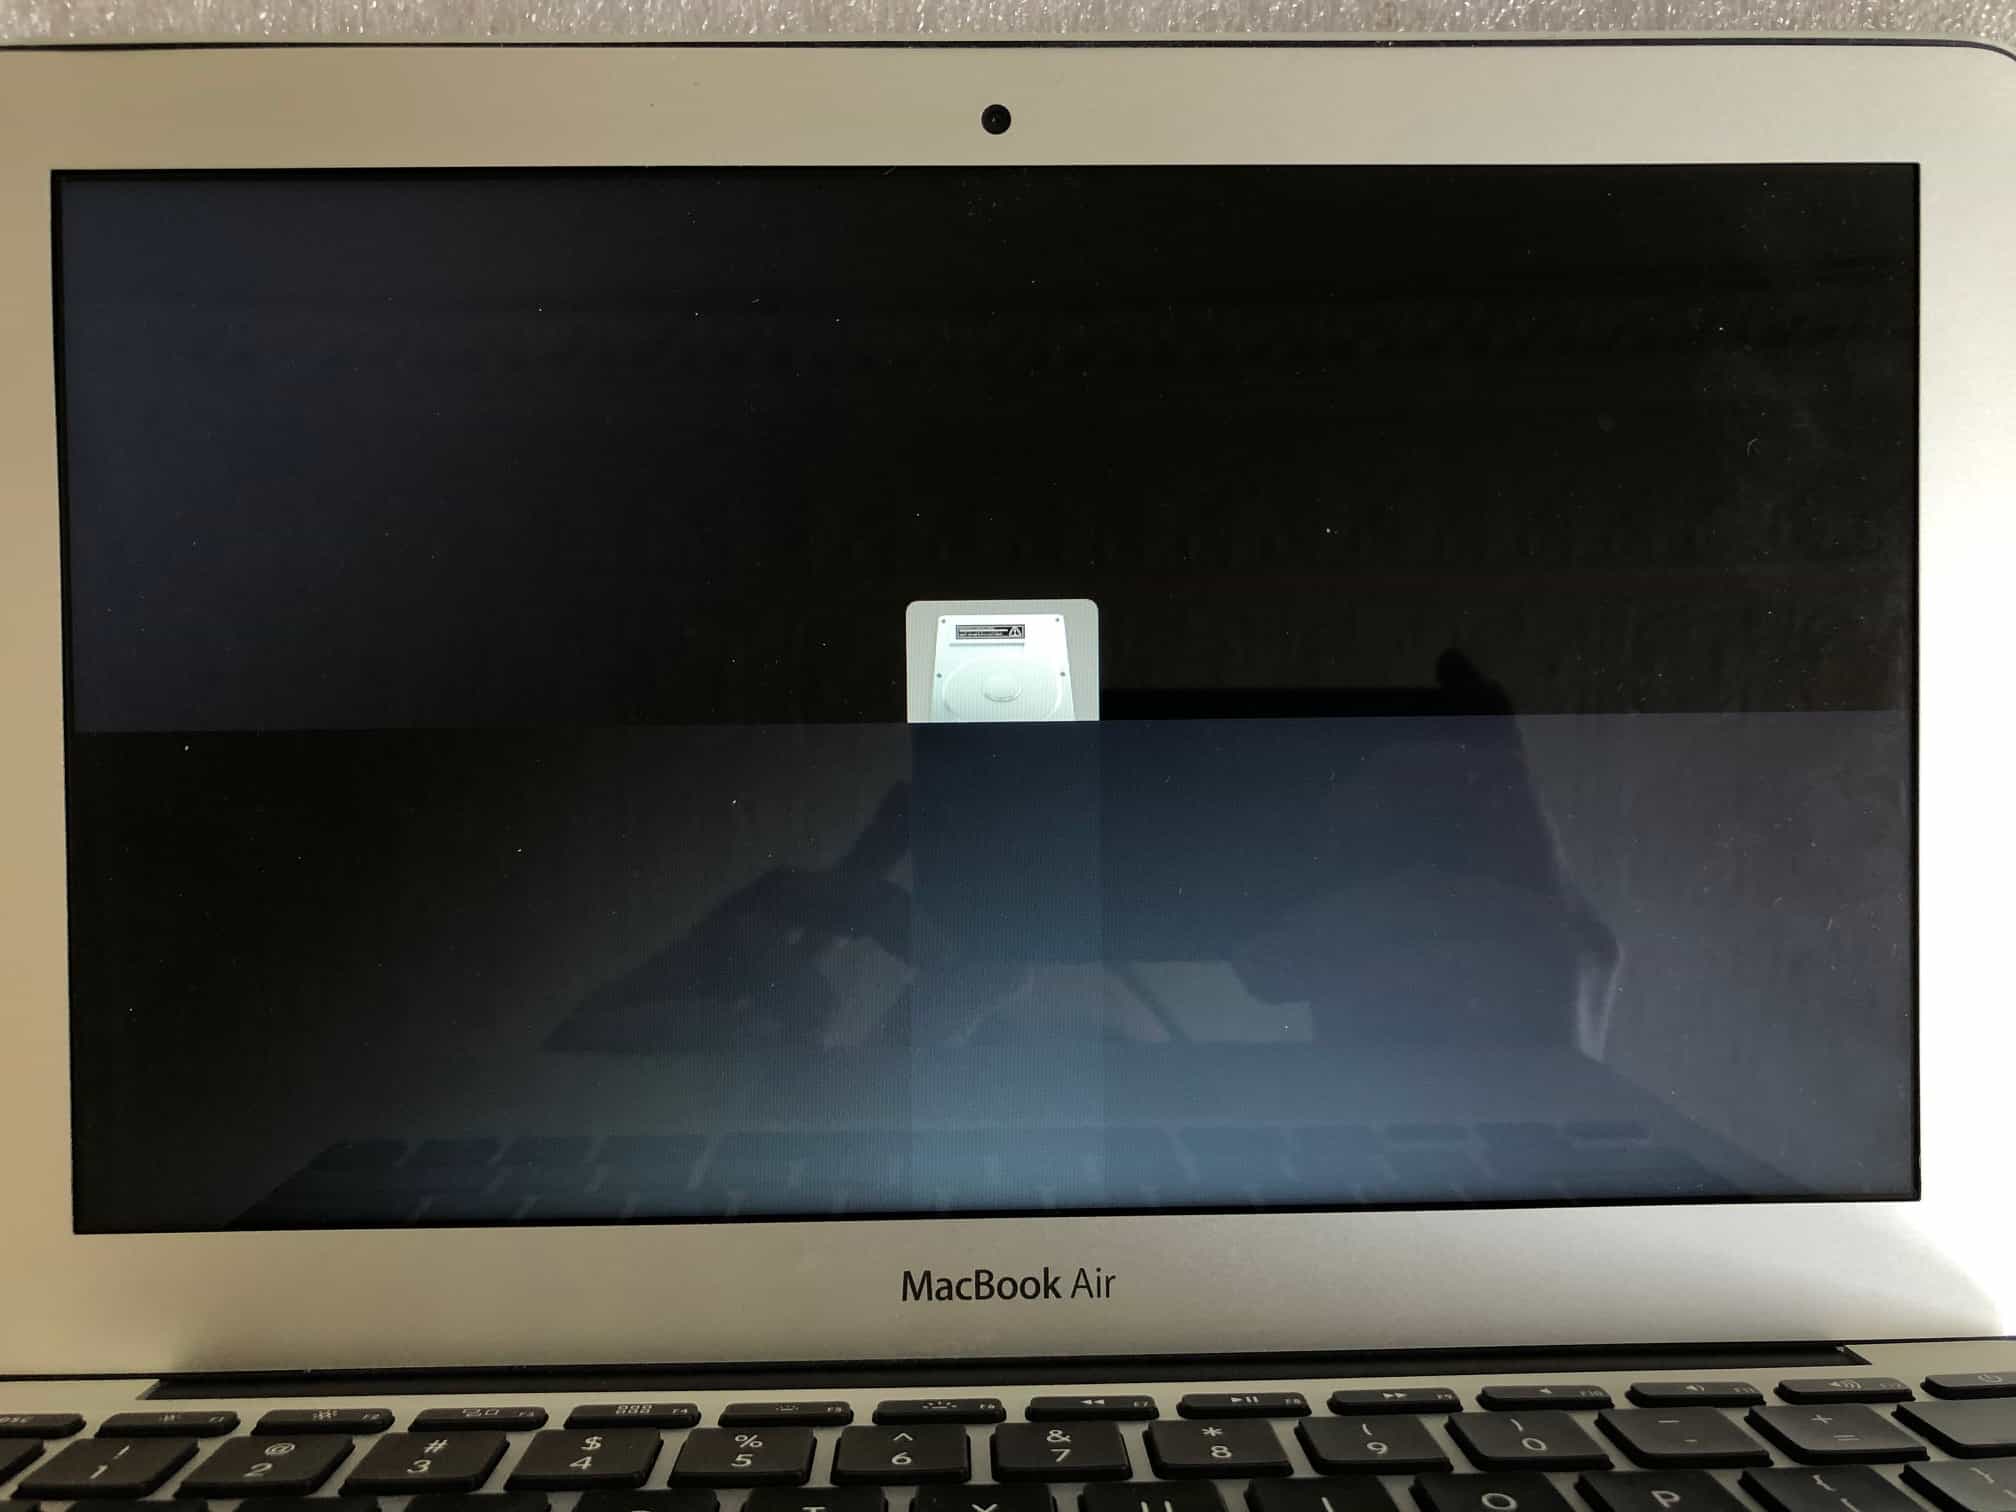 MacBook Air With Distorted Bars Discoloration On Screen